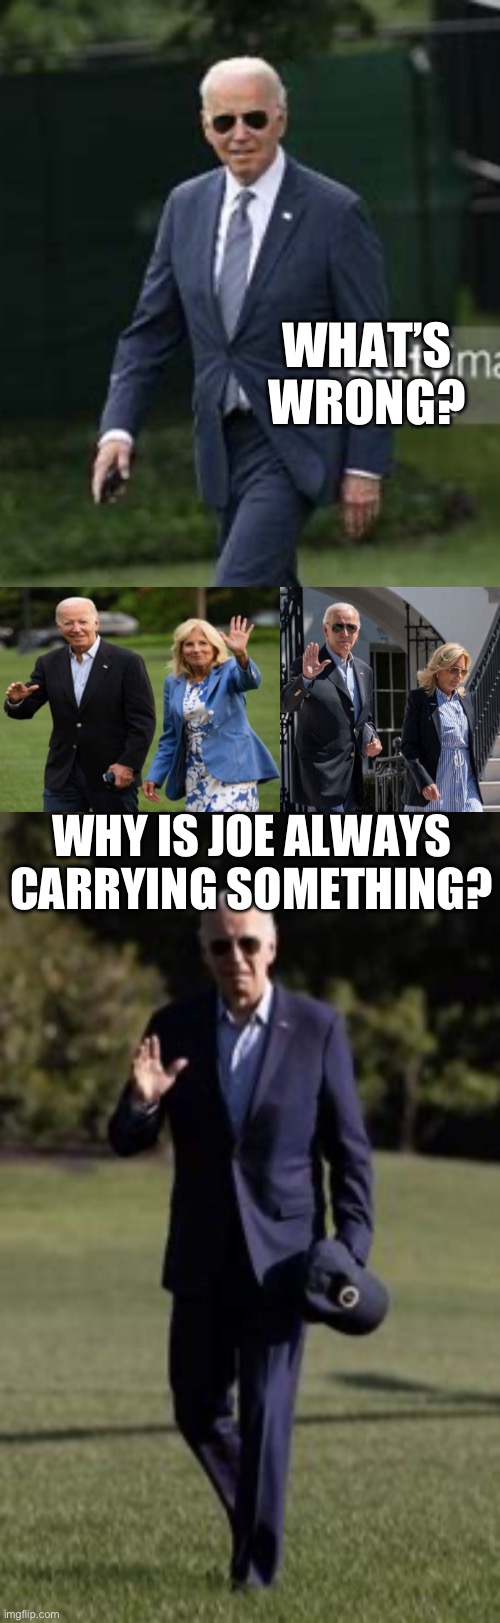 Always carries something, Why? | WHAT’S WRONG? WHY IS JOE ALWAYS CARRYING SOMETHING? | image tagged in gifs,biden,dementia,corruption,incompetence,old | made w/ Imgflip meme maker